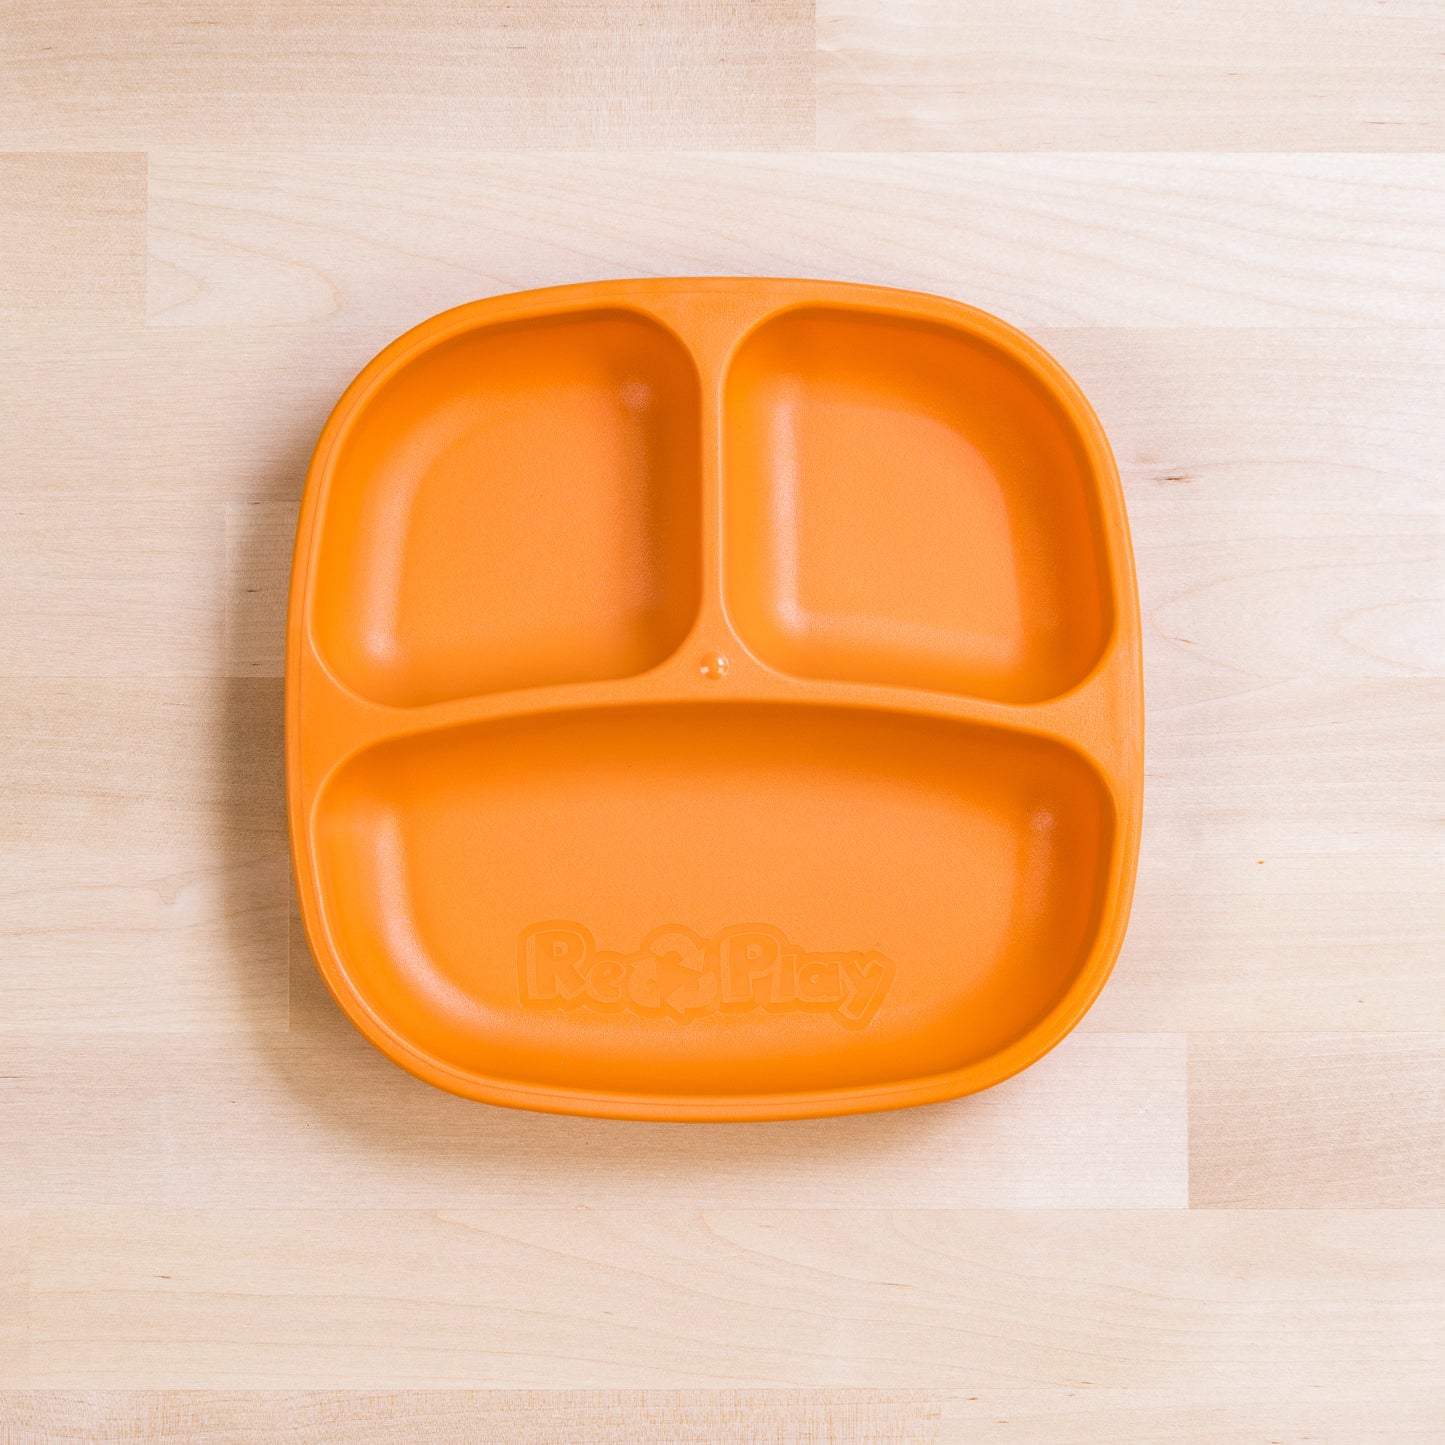 Re-Play Divided Plates Set - Orange, Yellow & Lime Green